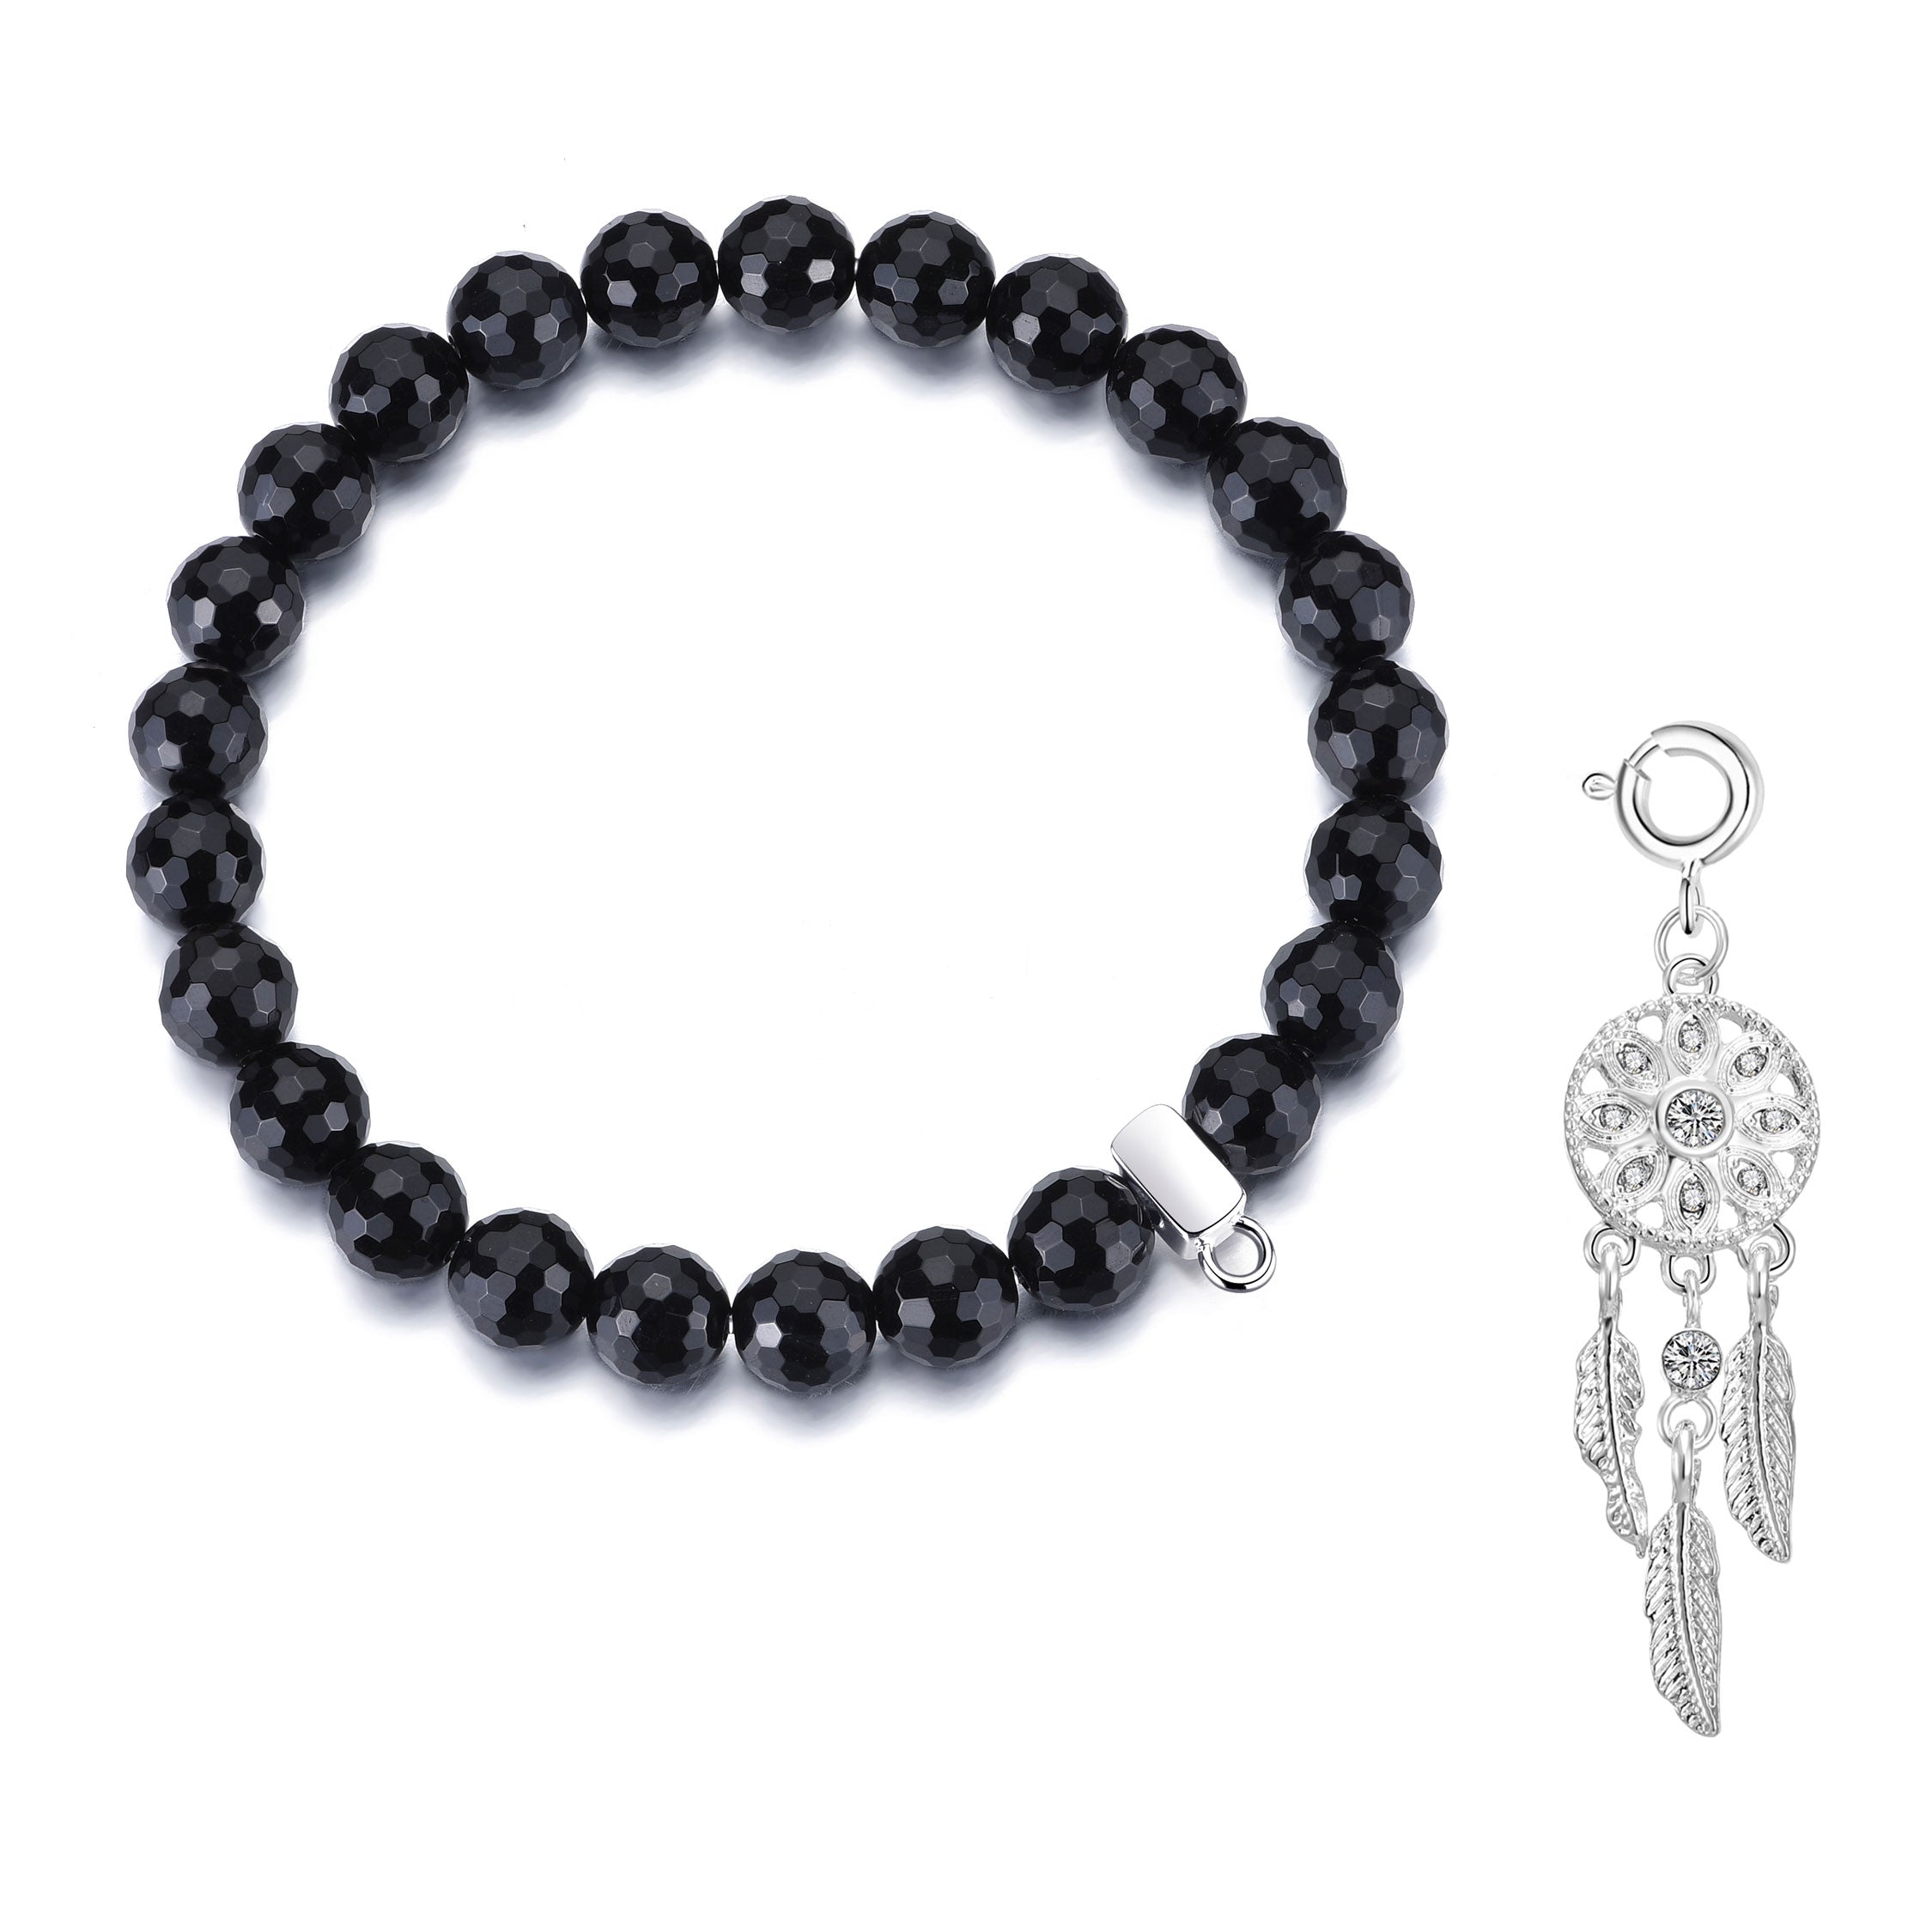 Faceted Black Onyx Gemstone Stretch Bracelet with Charm Created with Zircondia® Crystals